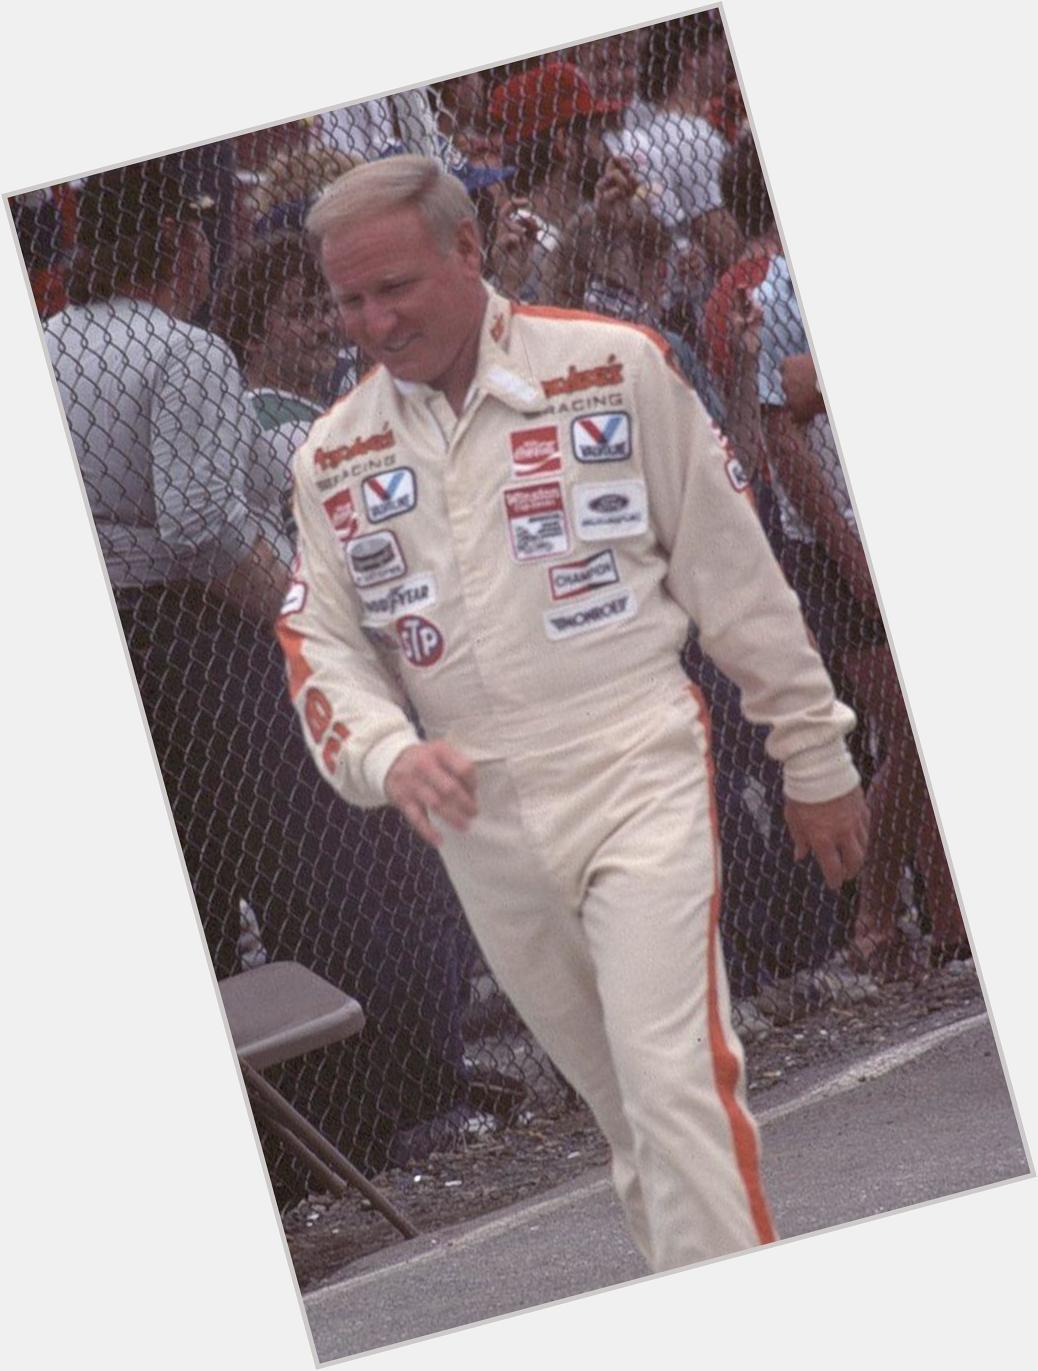 Cale Yarborough hairstyle 3